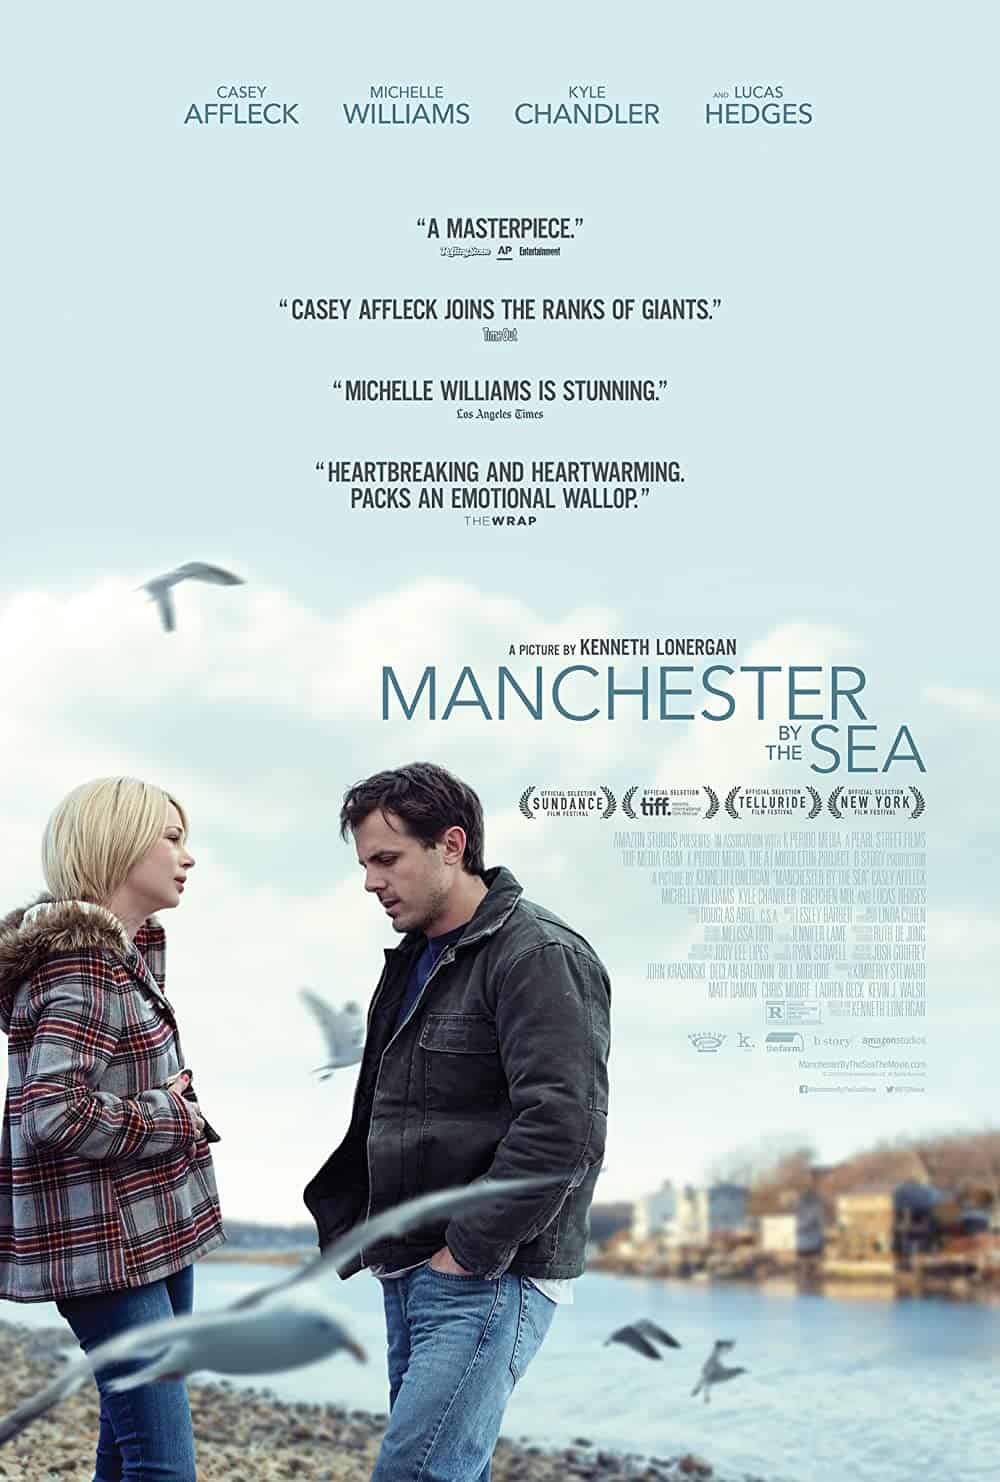 Good Will Hunting similar movies Manchester by the Sea (2016)